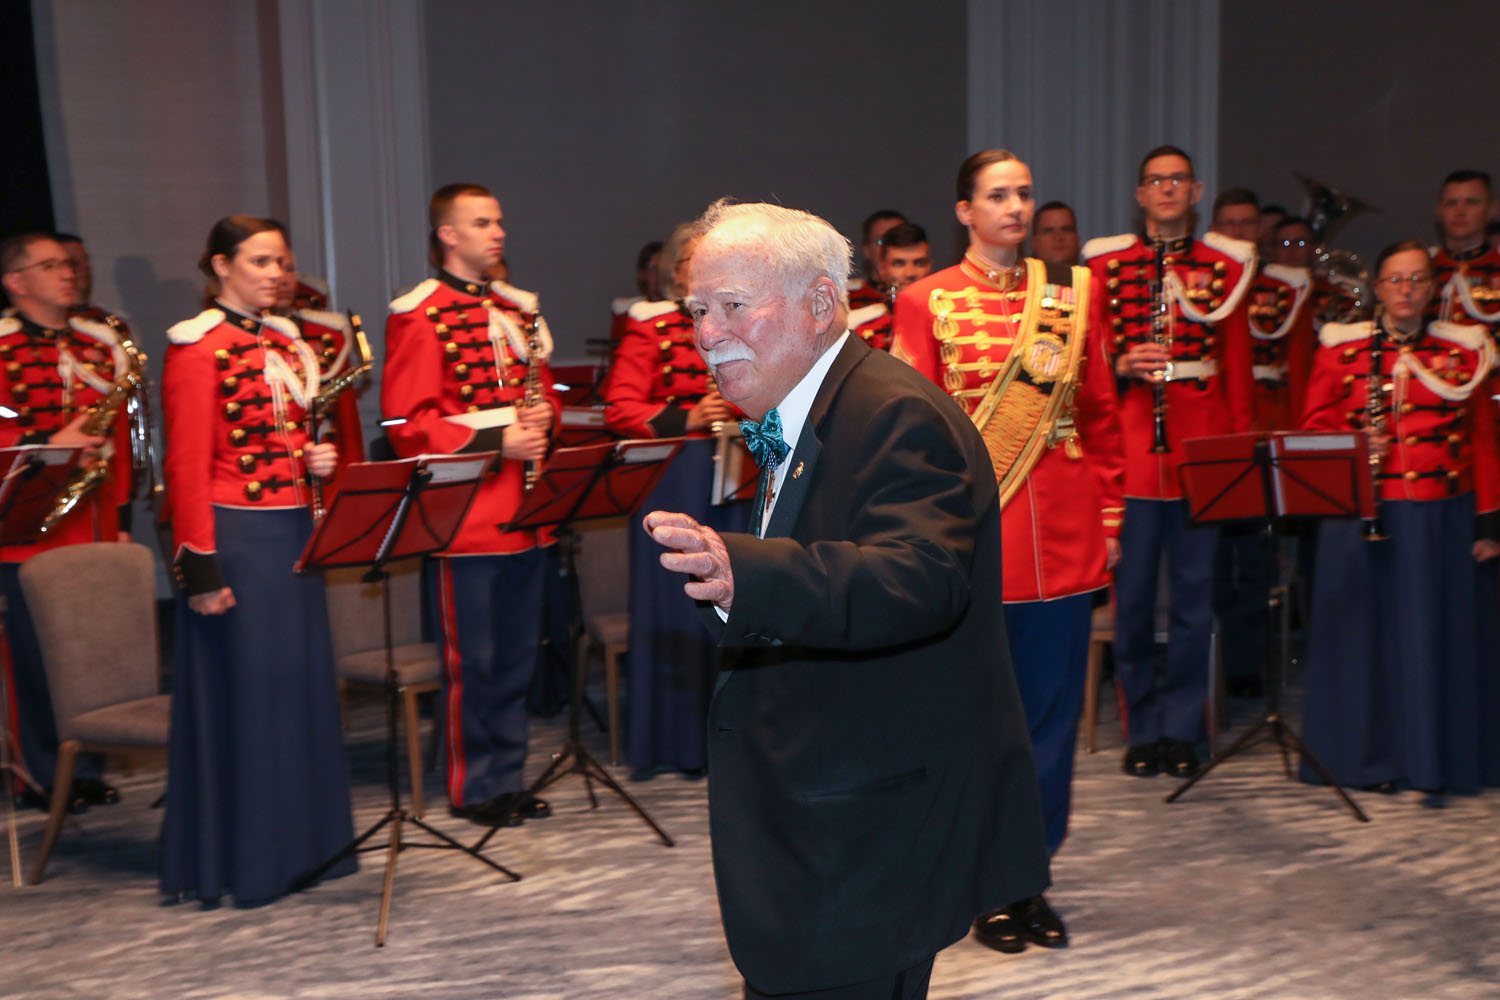 Col Barnum and The President's Own Marine Band